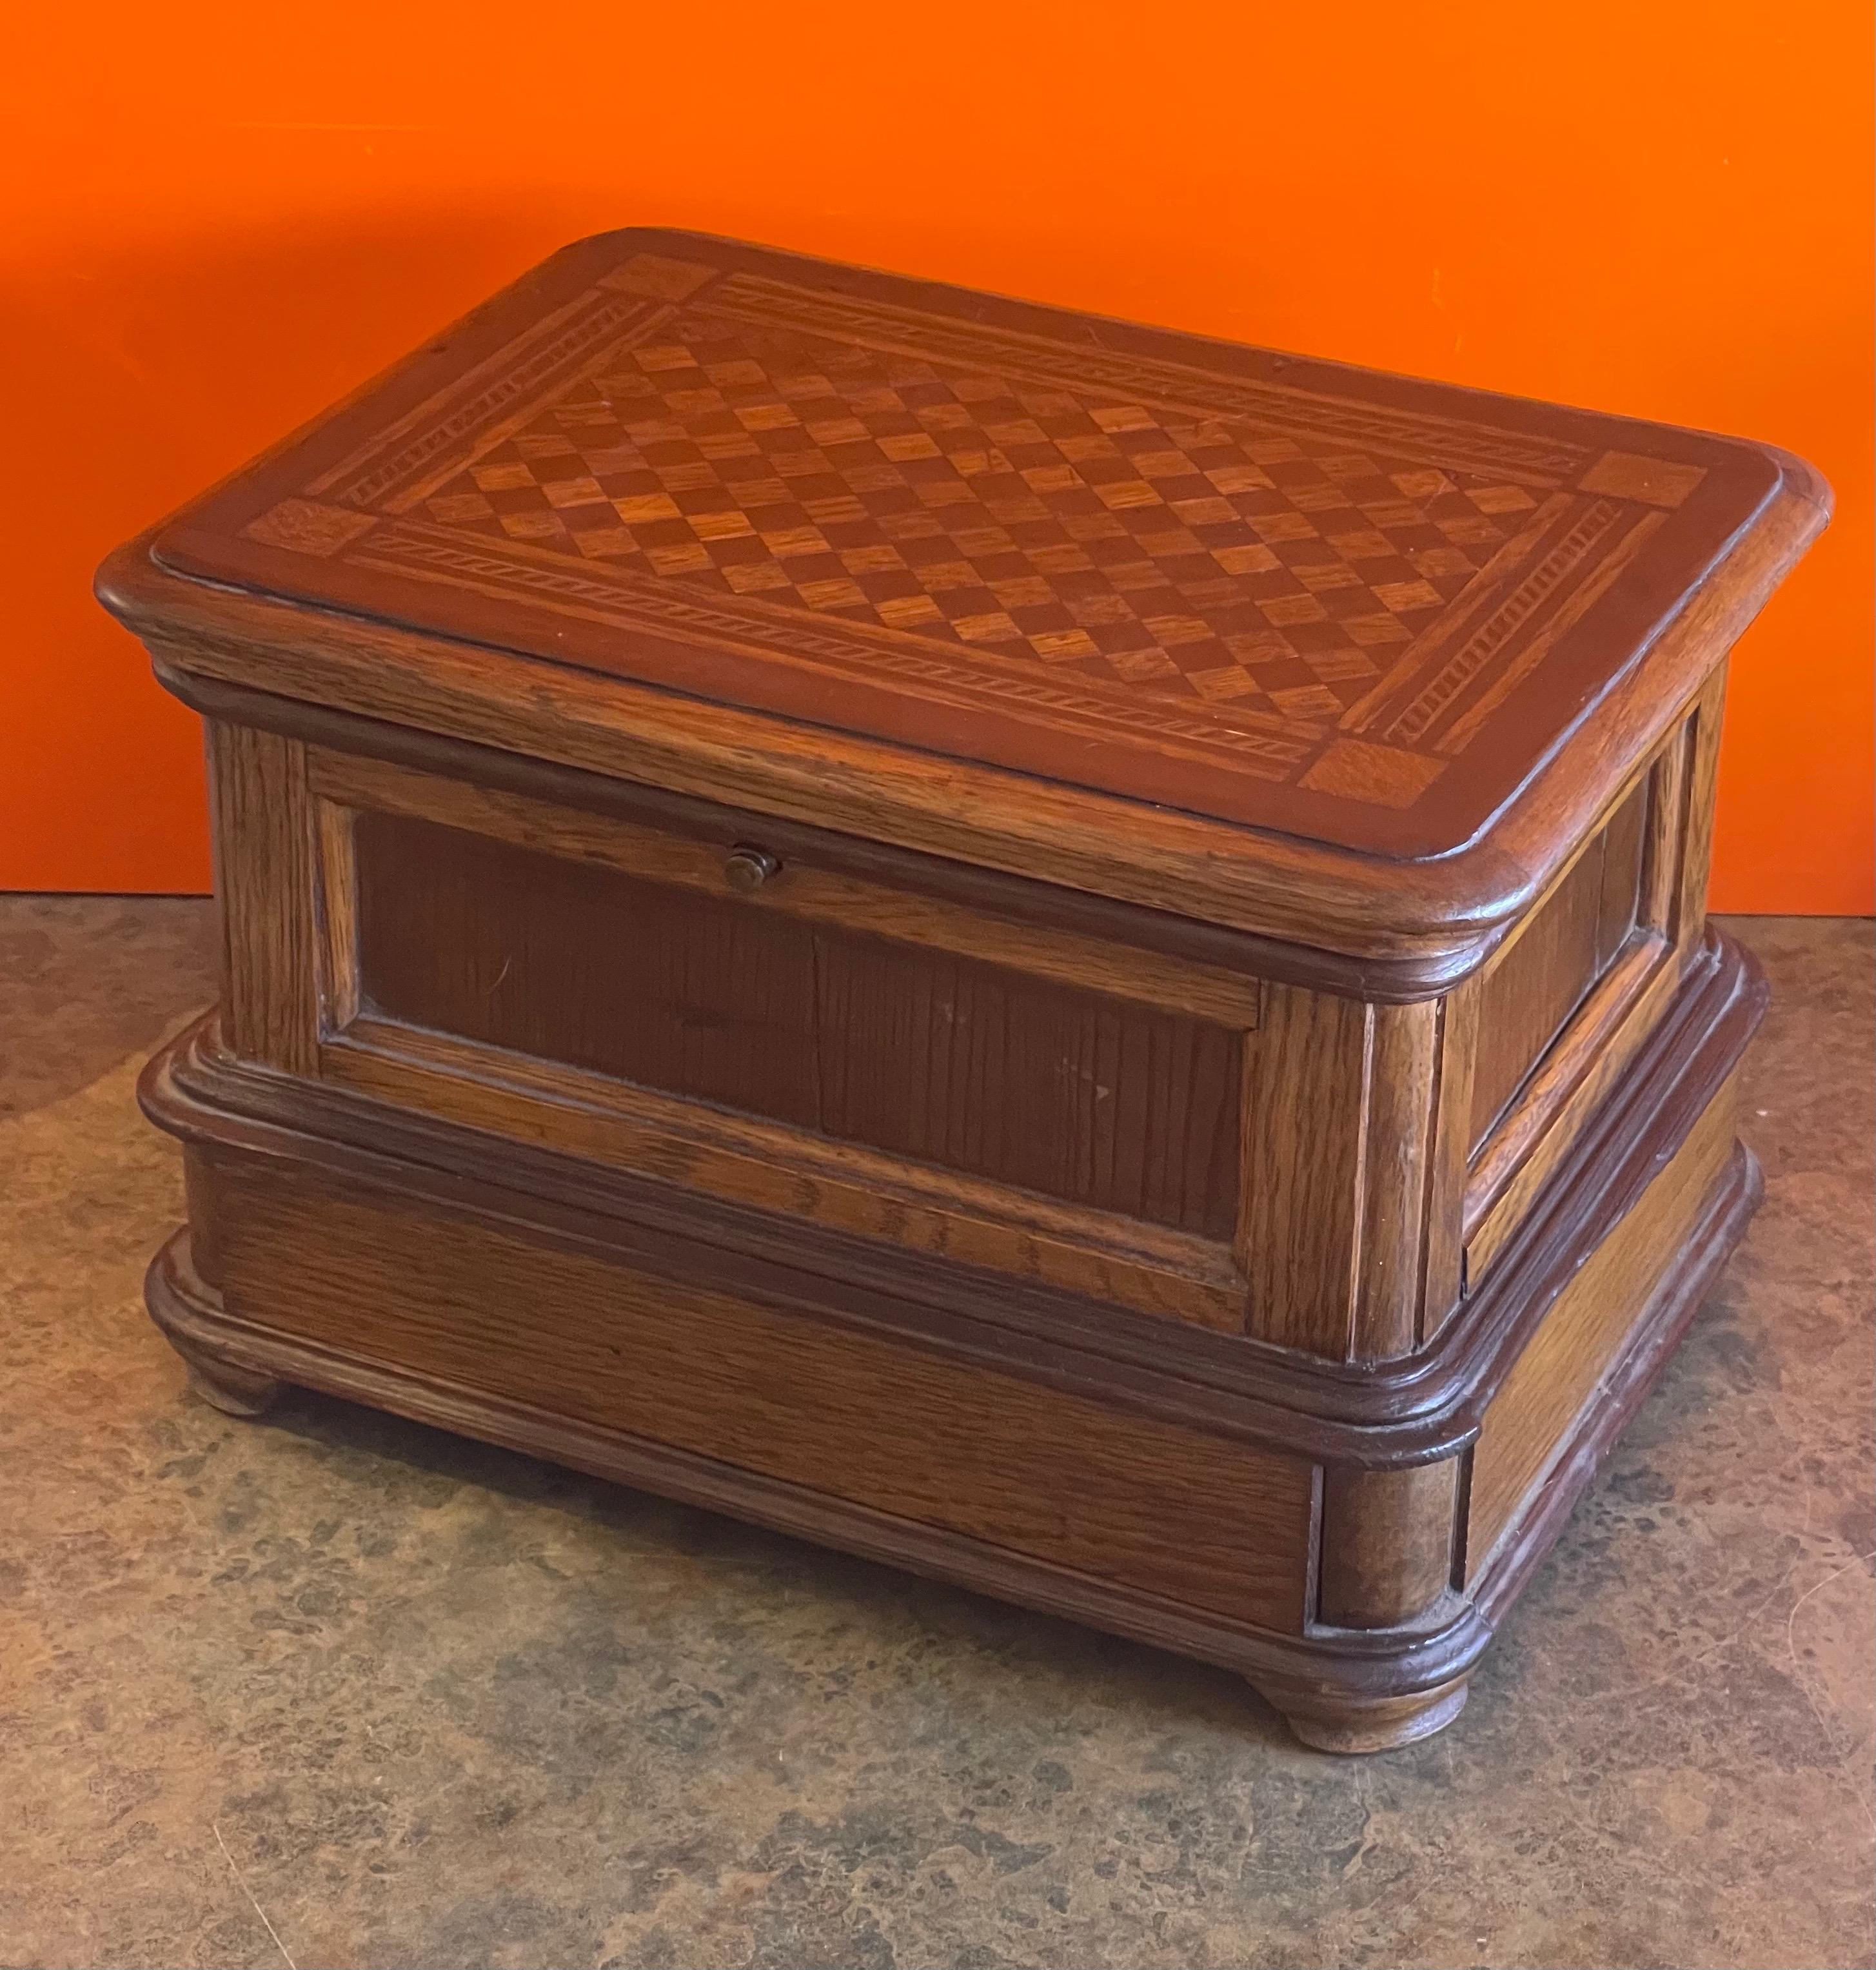 Simple and elegant antique jewelry box with inlaid wood top, circa 1930s. The piece is more of a decorative item than functional; the top opens up, but the button can stick at times. The mirror inside is missing and the bottom 